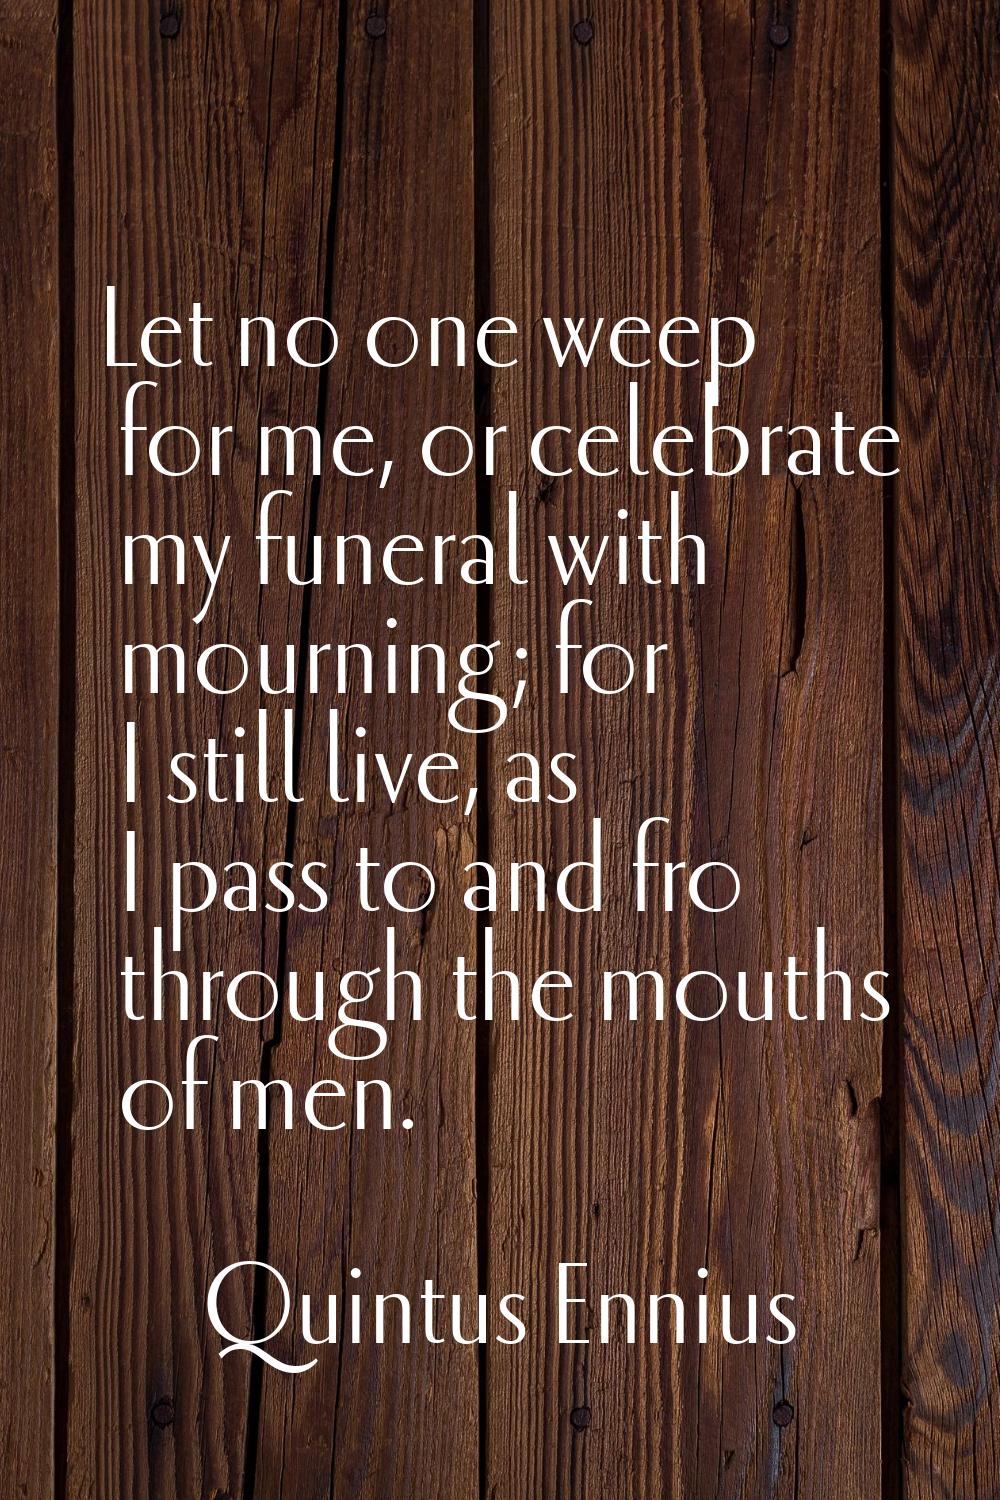 Let no one weep for me, or celebrate my funeral with mourning; for I still live, as I pass to and f